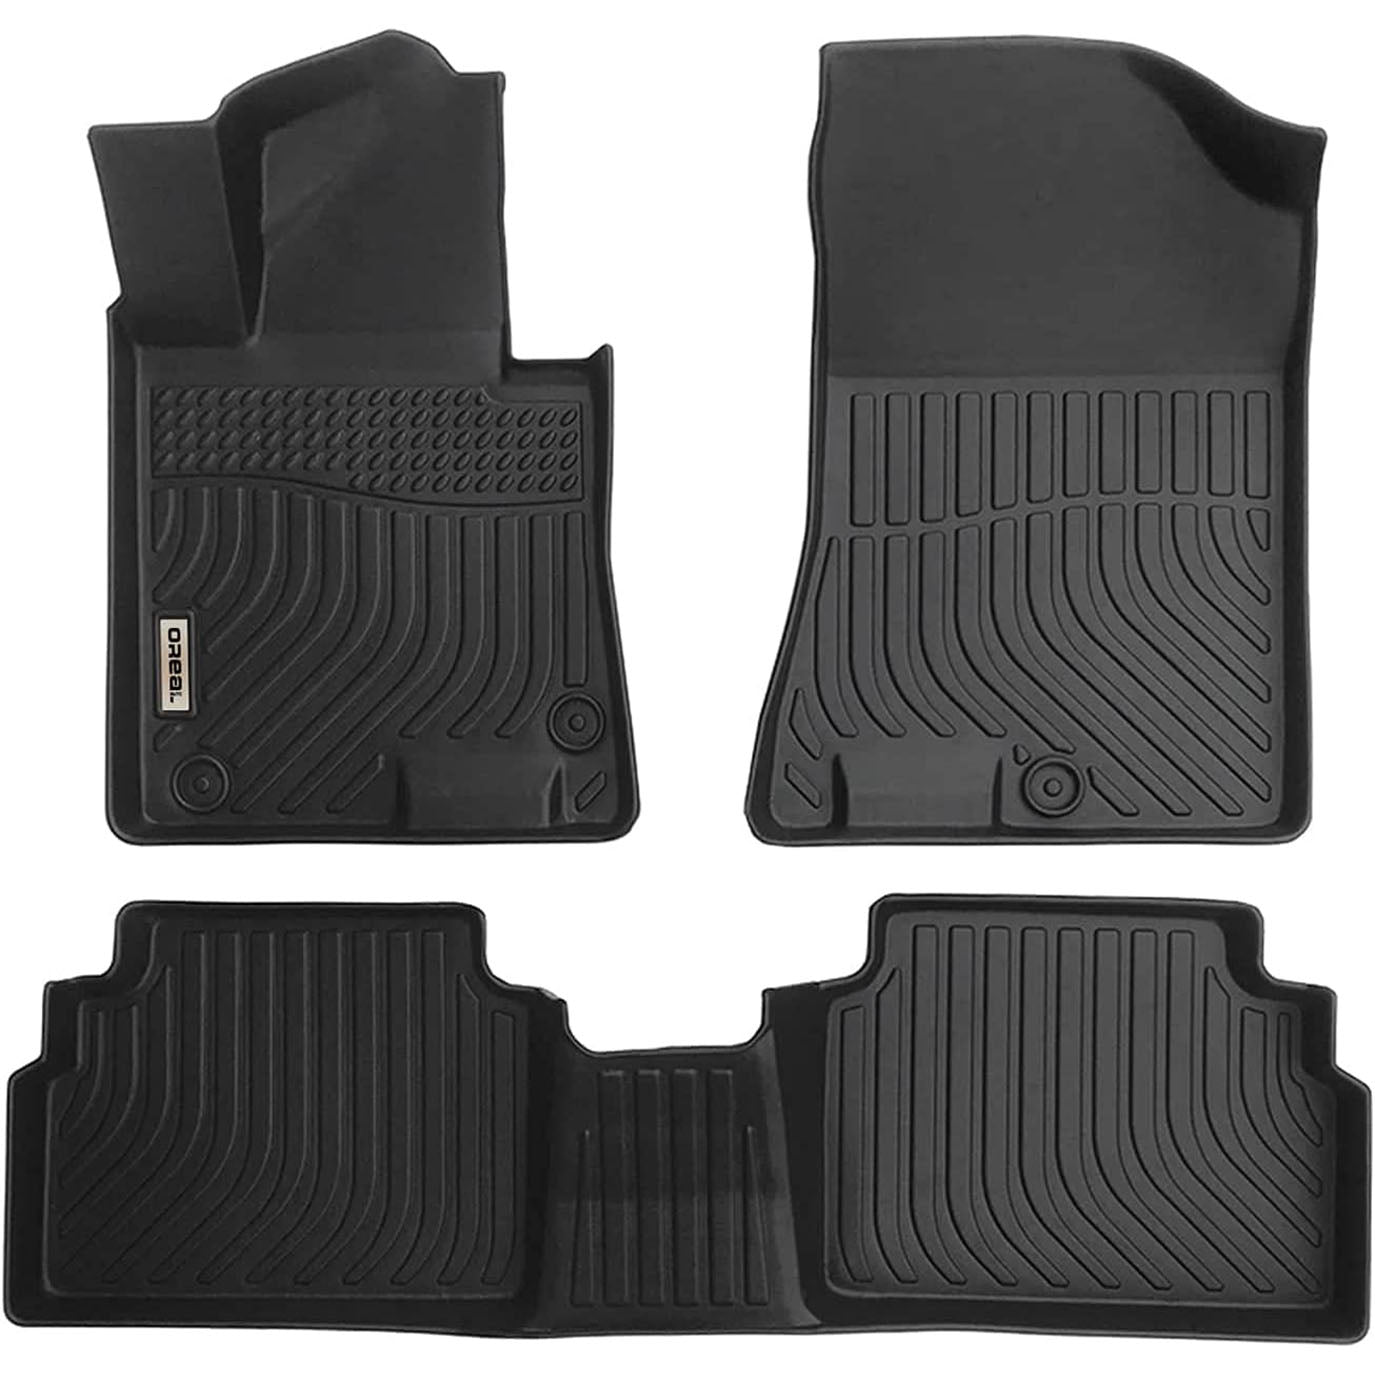 Kia K5 FWD 2021 2022(Only Fit Front Wheel Drive, Not Fit AWD) Black Floor Mats TPE